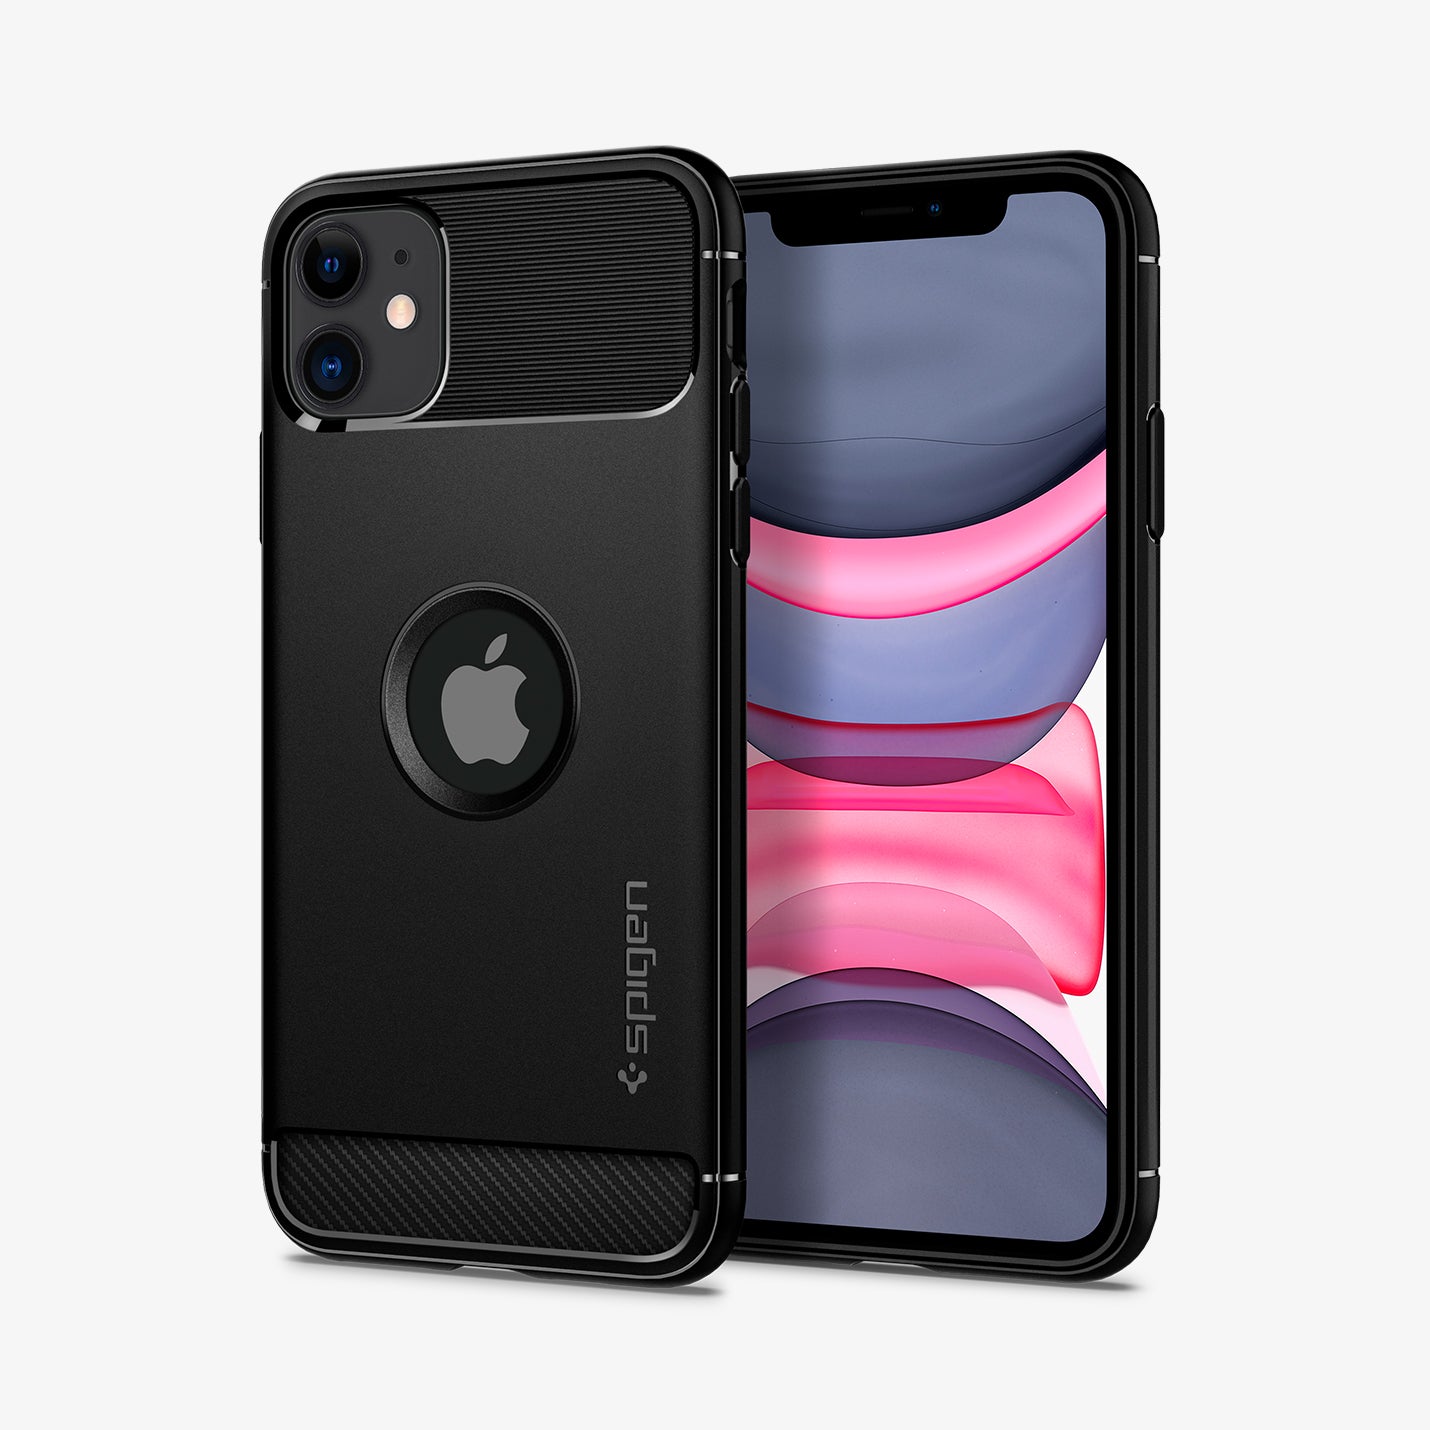 076CS27183 - iPhone 11 Case Rugged Armor in Matte Black showing the back, partial side next to it, a device showing front and partial side